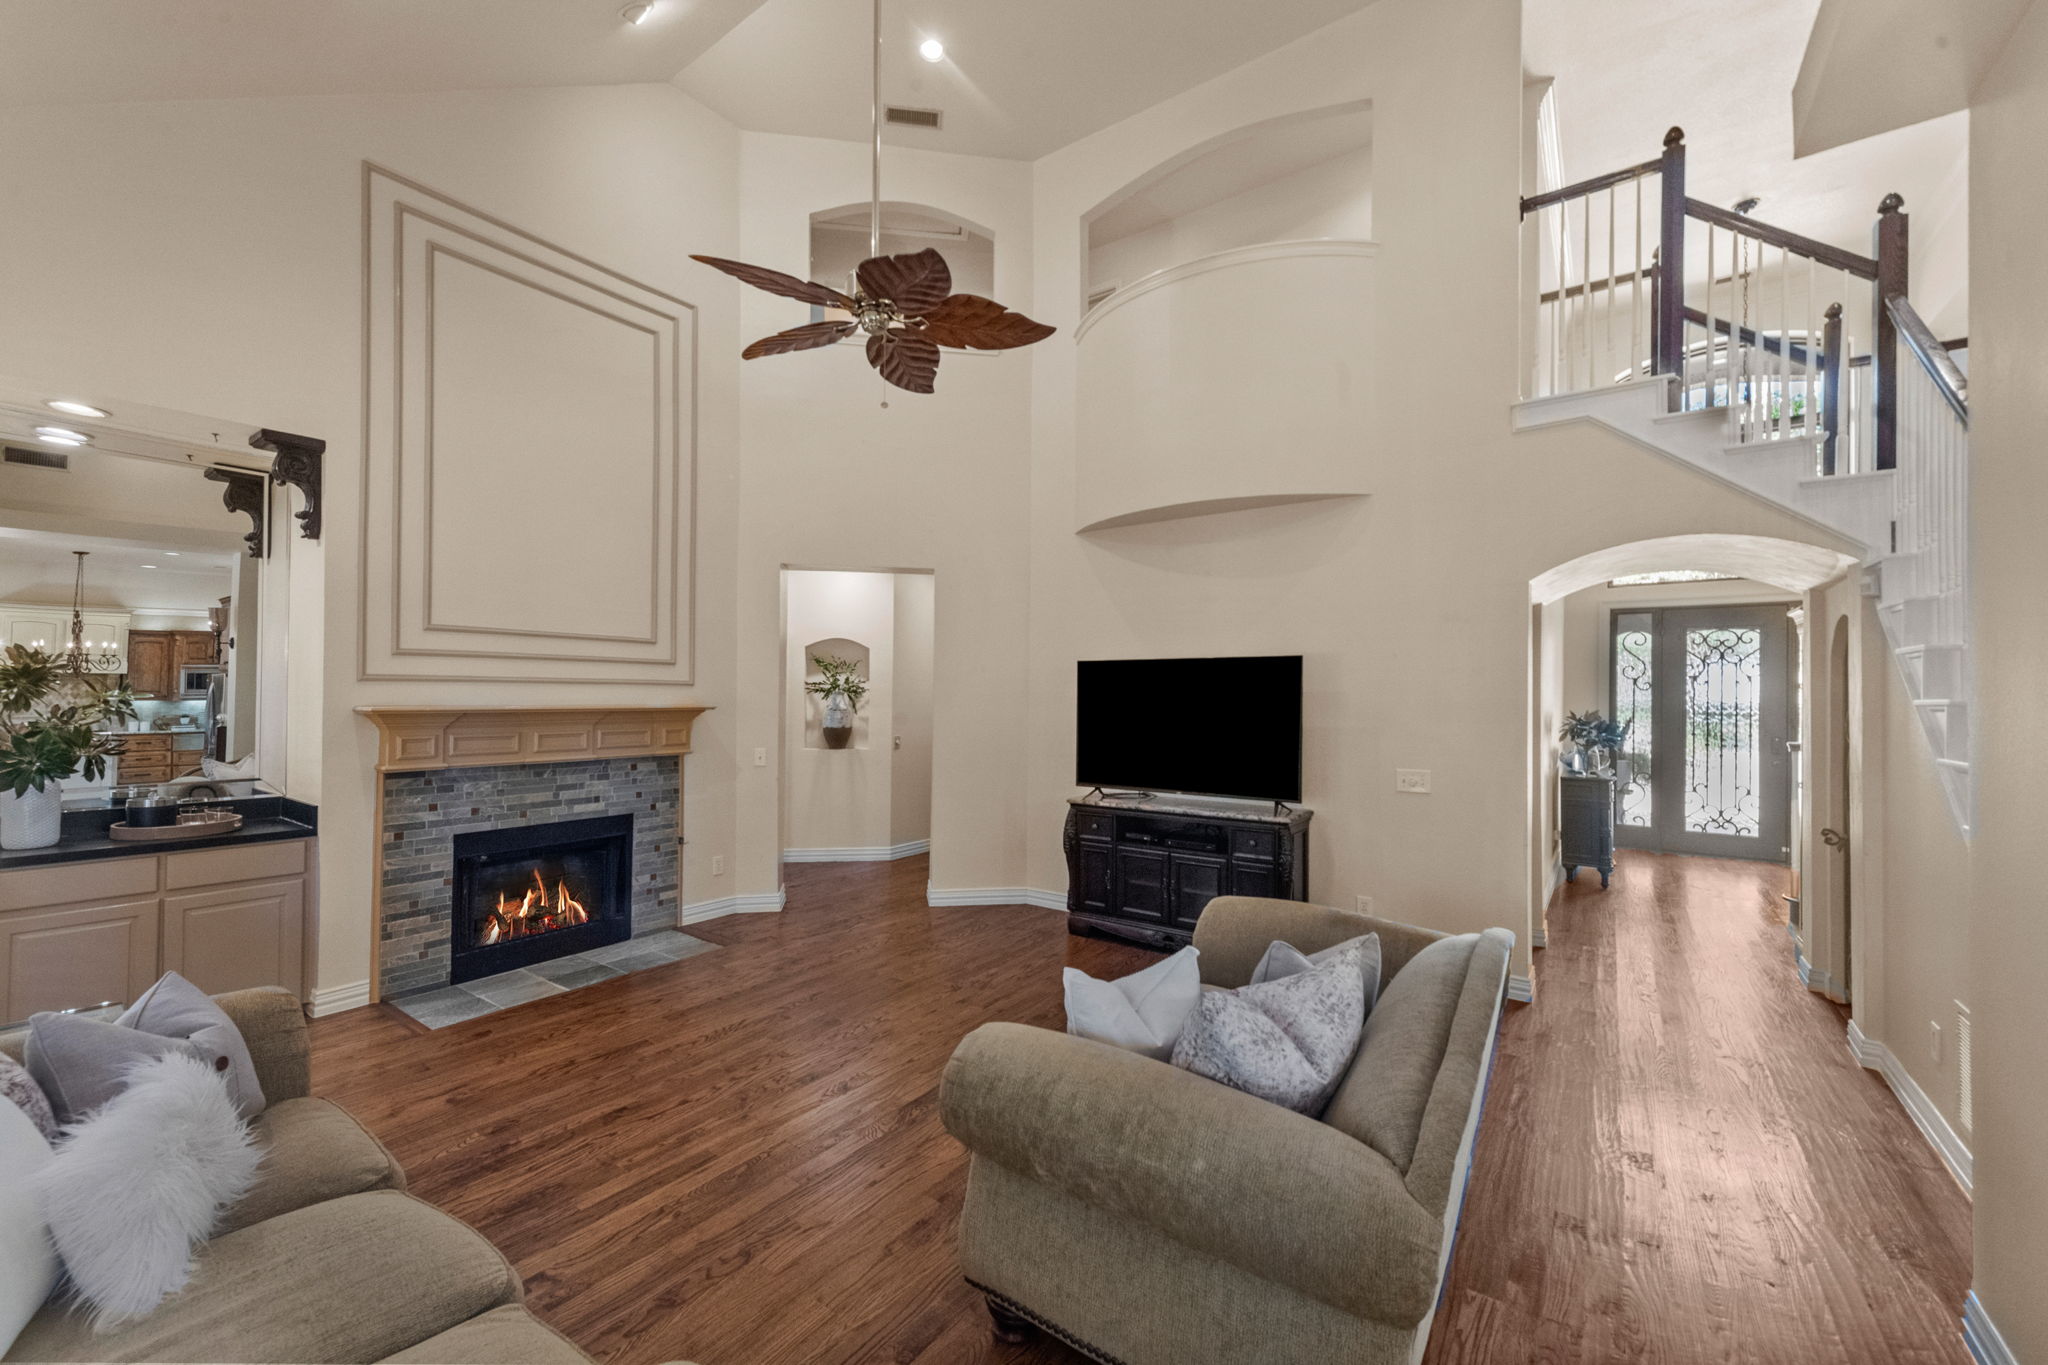 The high ceiling and other features add character to the family room.